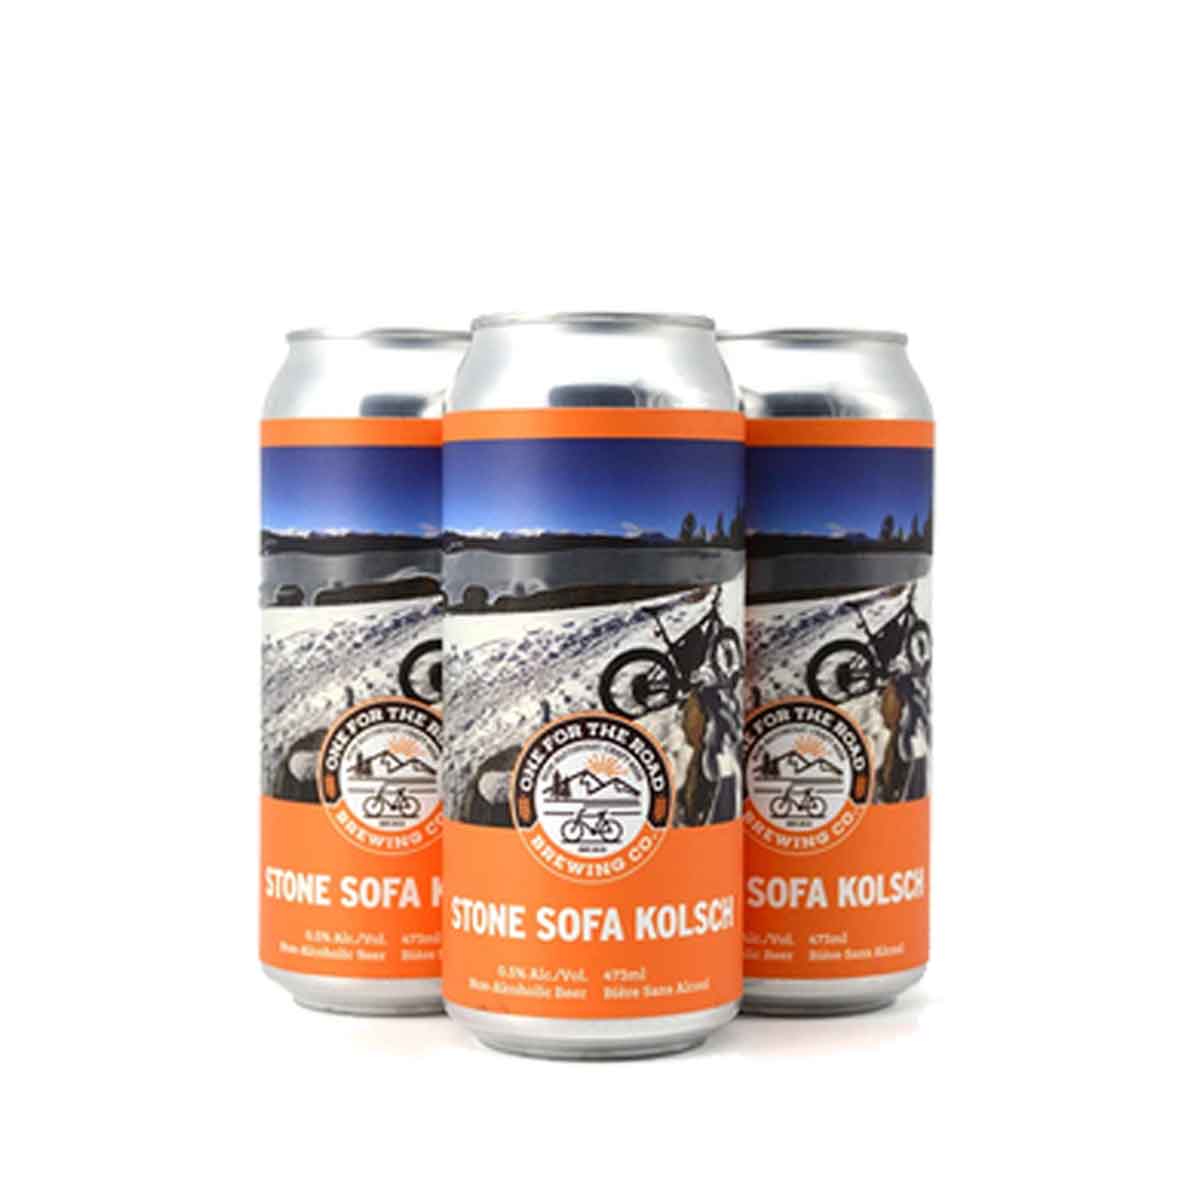 TAG Liquor Stores BC-ONE FOR THE ROAD STONE SOFA KOLSCH 4 PACK TALL CANS